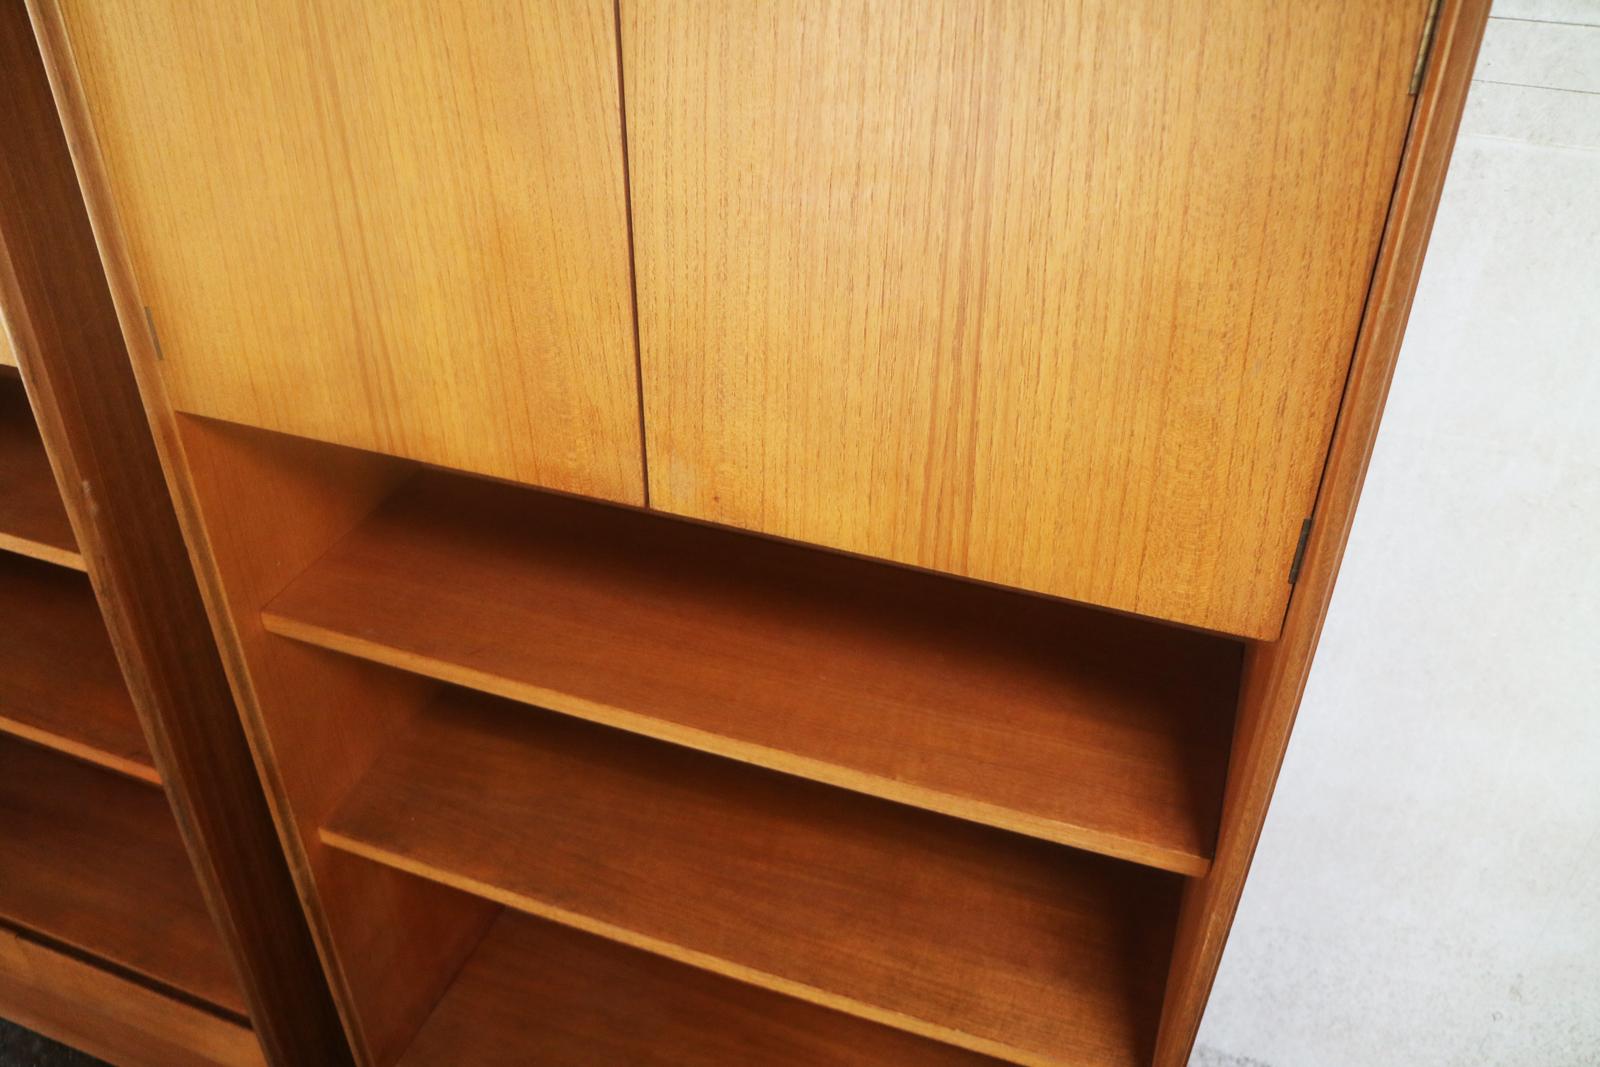 Two matching shelving units by G Plan. minimally designed with a Danish sensibility. Two cupboards at the top and two drawers at the bottom of each unit. Open book shelving in between. Original label on each unit.

The price listed is for the two